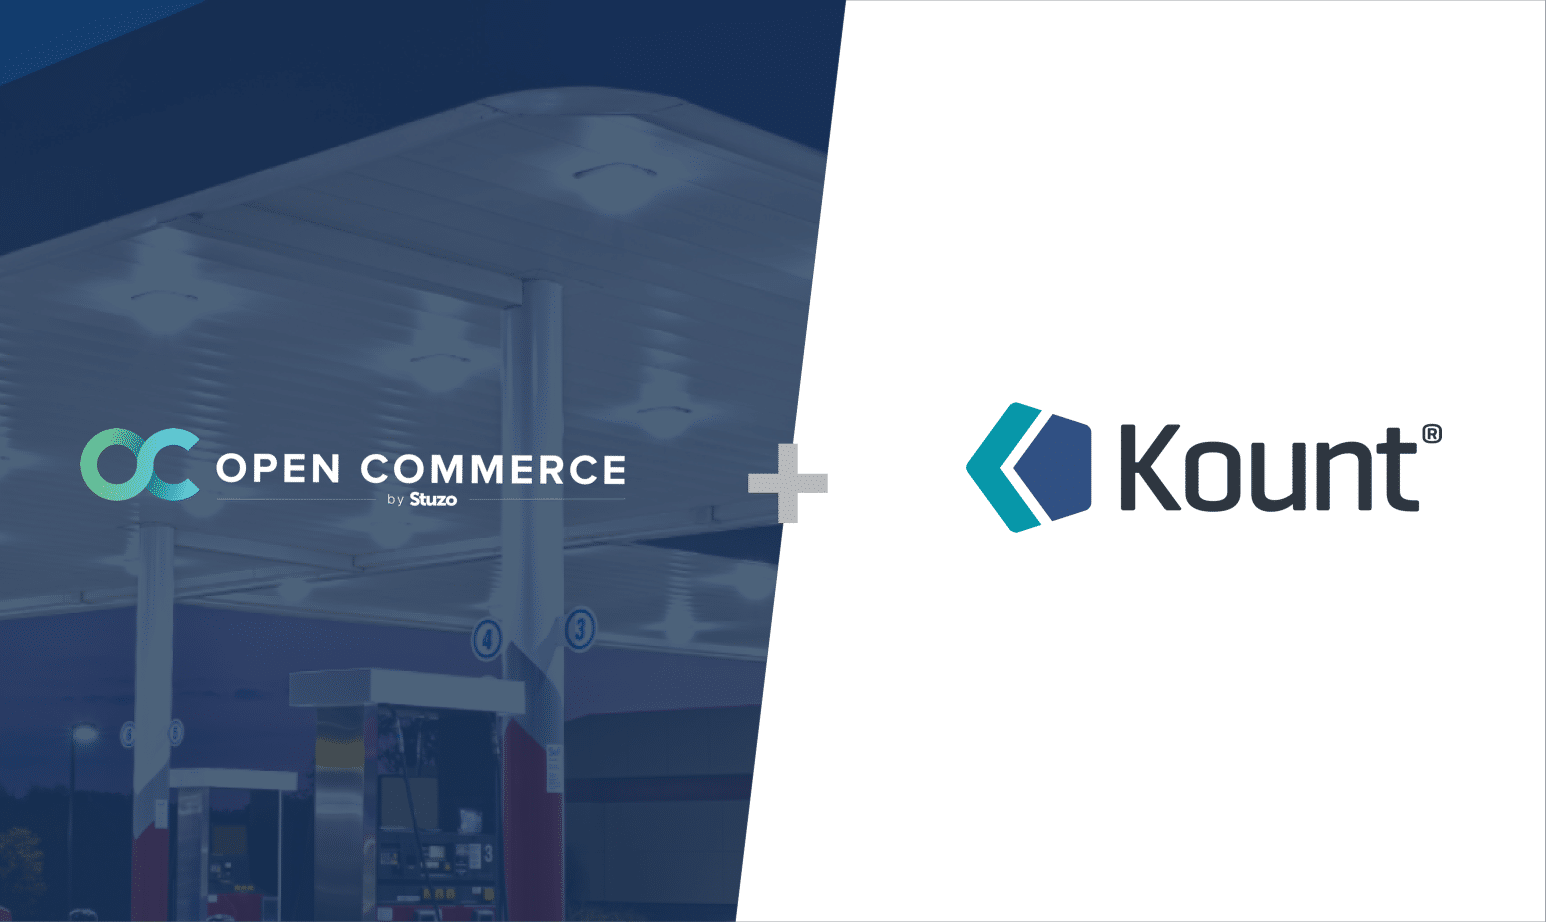 Stuzo partners with Kount to bring industry-leading fraud protection to Stuzo's Open Commerce platform.